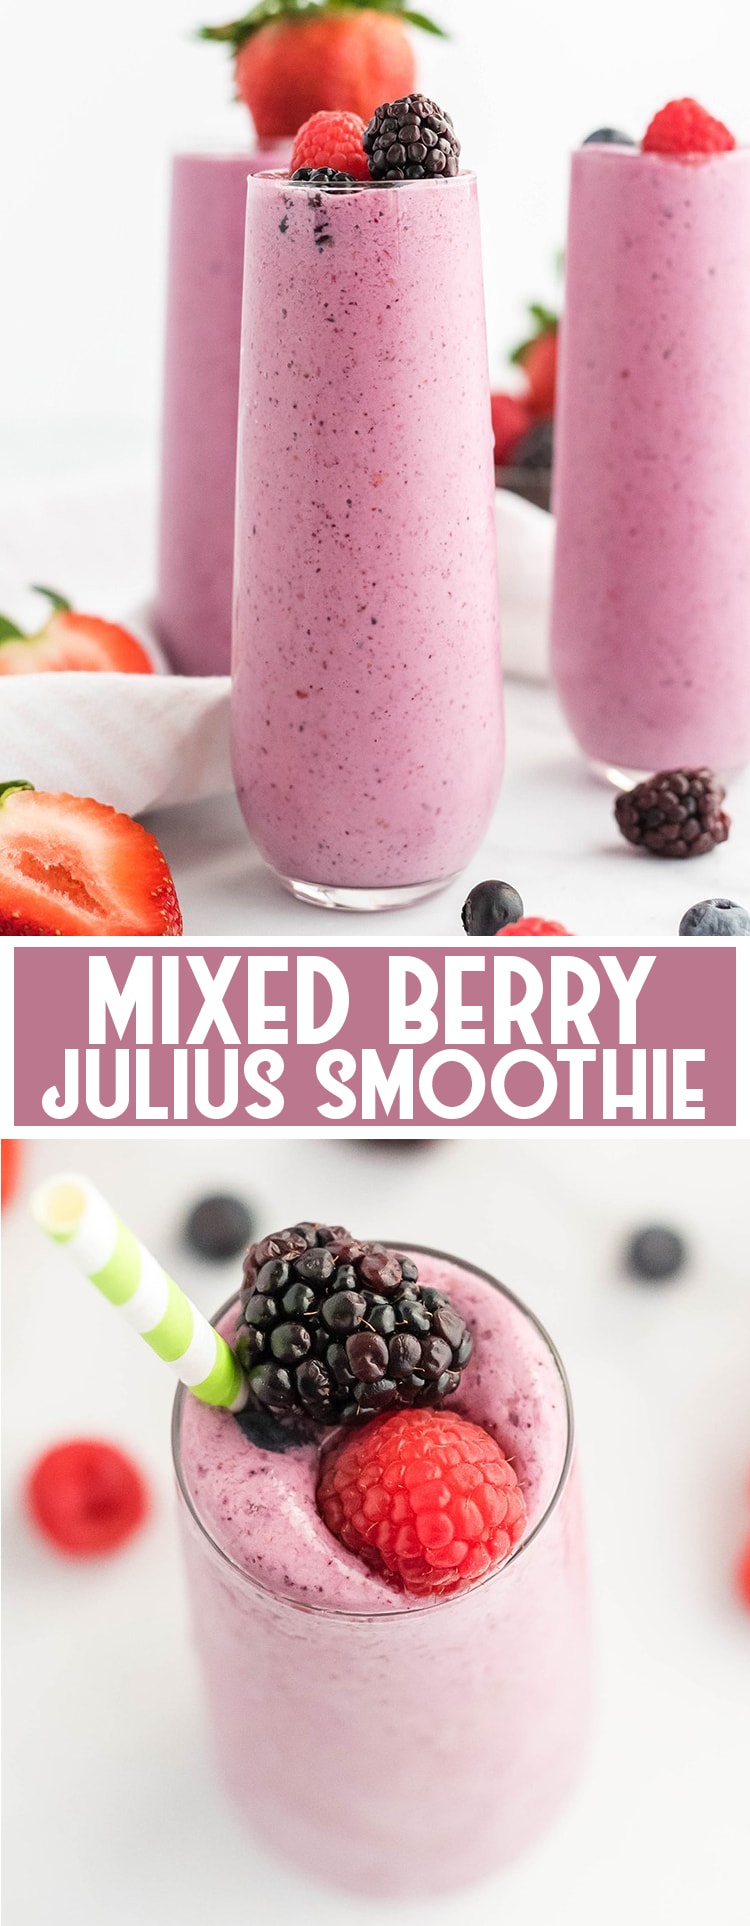 2 image collage of glasses filled with mixed berry julius topped with berries and title card.